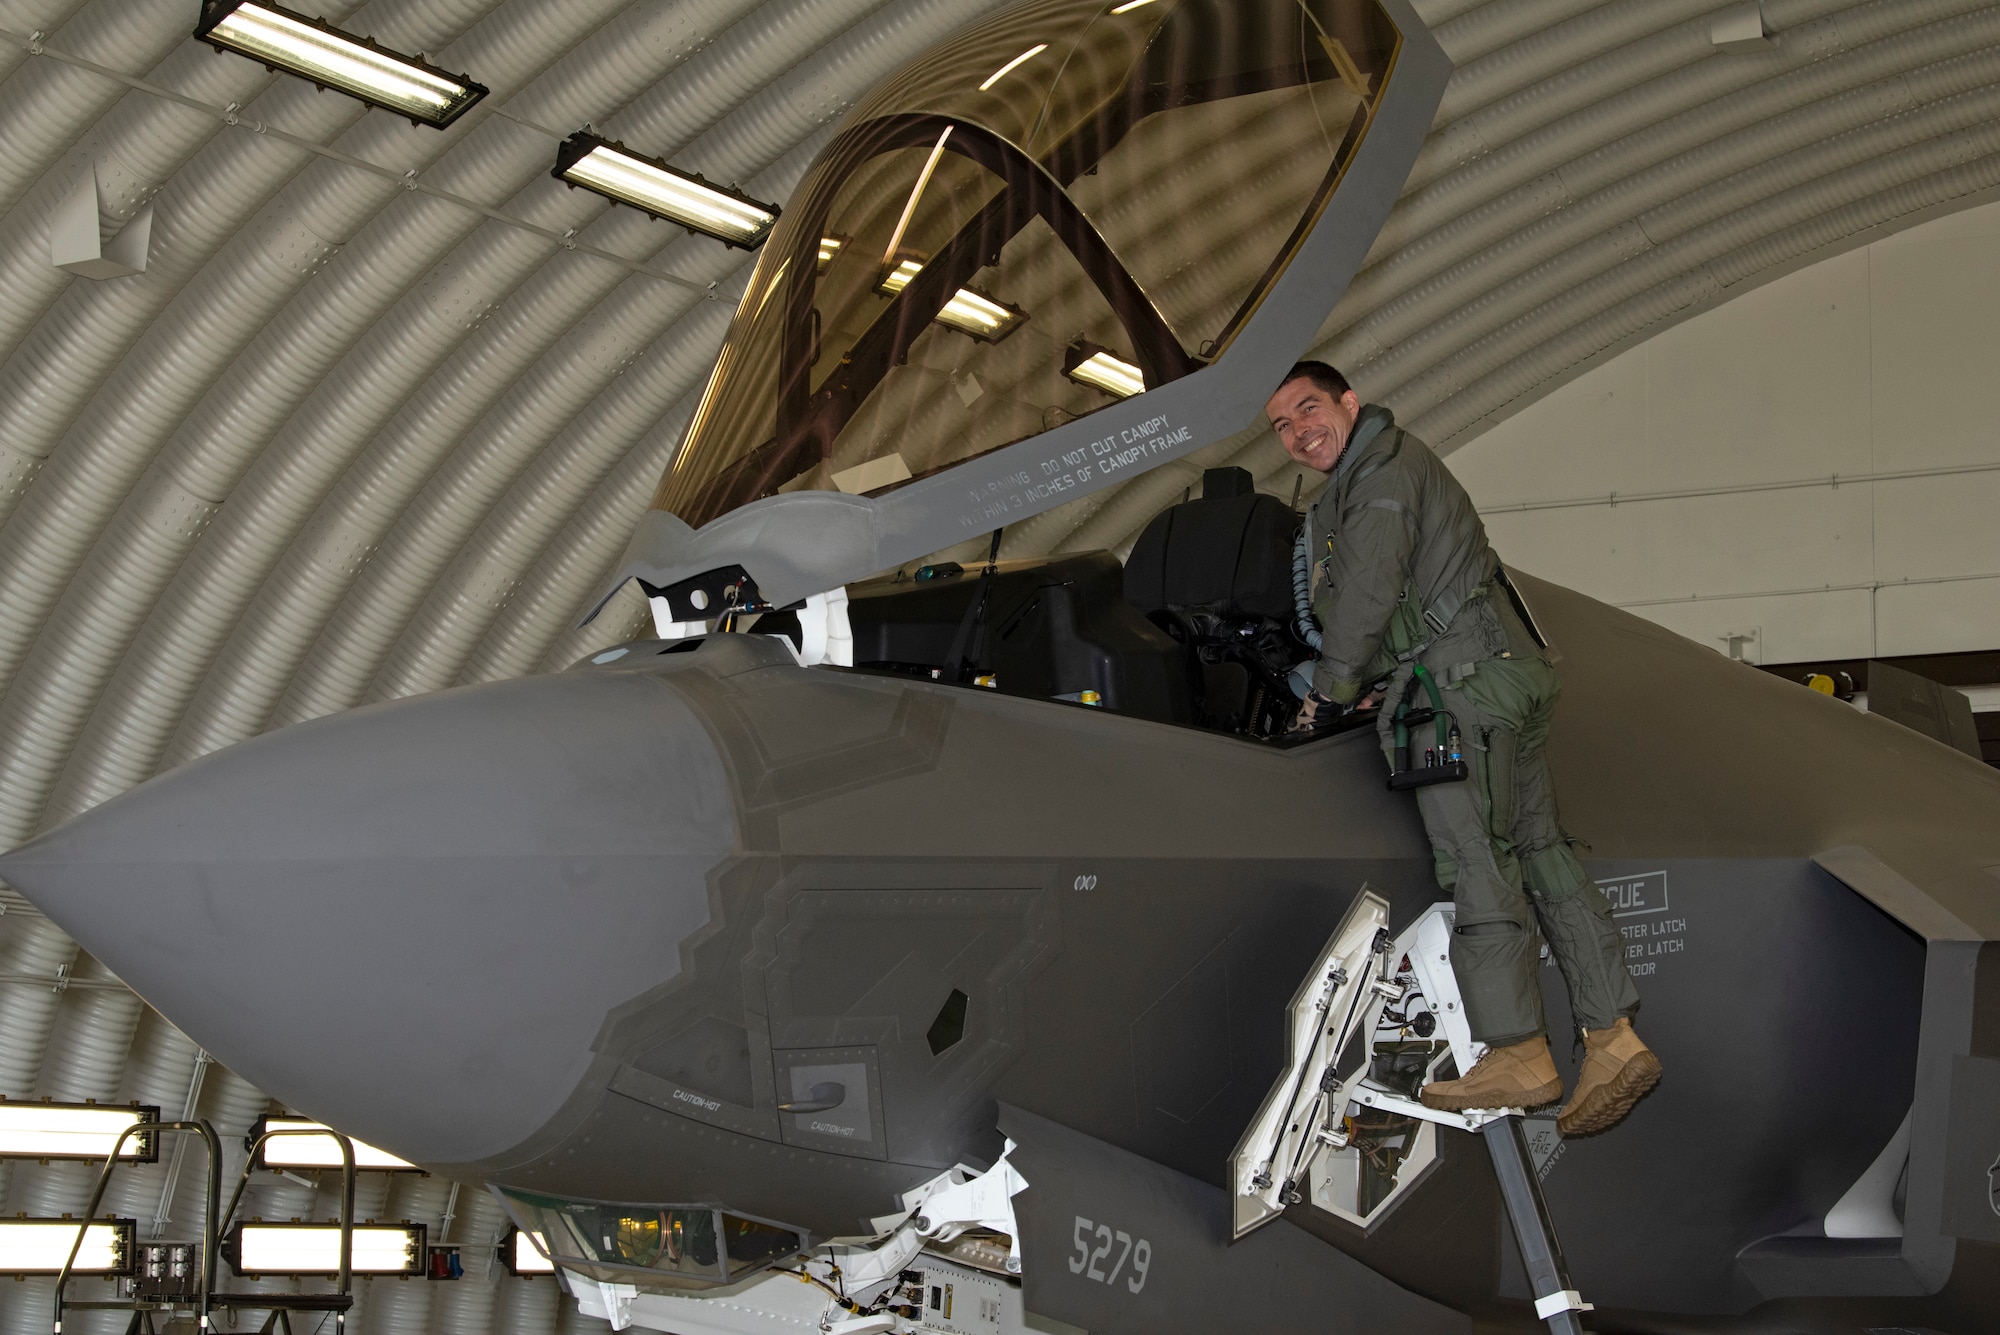 U.S. Air Force Lt. Col. Christopher White, 315th Fighter Squadron commander, currently deployed to Spangdahlem Air Base, Germany, prepares an F-35A Lightning II aircraft for take off prior to reaching his 1,000th flight hour milestone, June 3, 2022. Airmen assigned to the Vermont Air National Guard are deployed to Europe in full coordination with host nations and NATO military authorities to increase readiness and enhance NATO's collective defense. (U.S. Air Force photo by Tech. Sgt. Anthony Plyler)